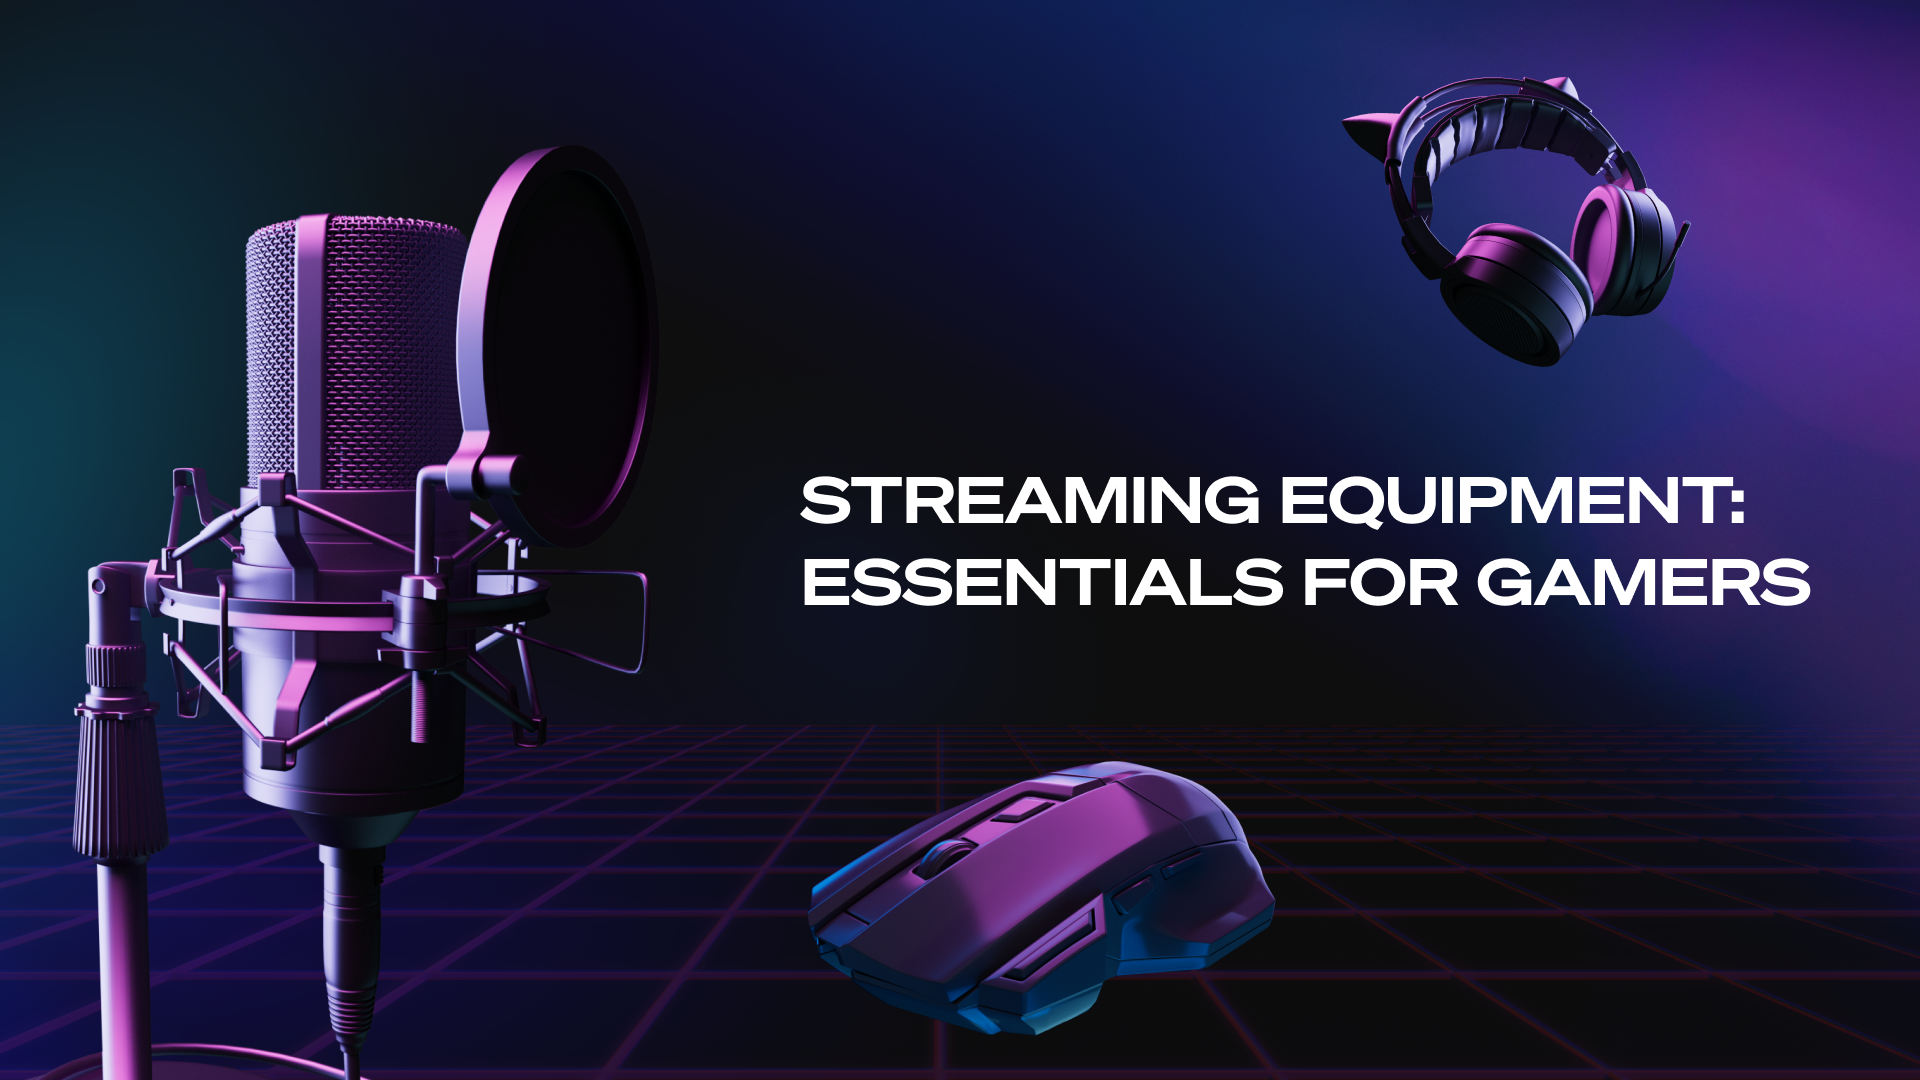 Streaming Equipment: 7 Essentials for Gamers